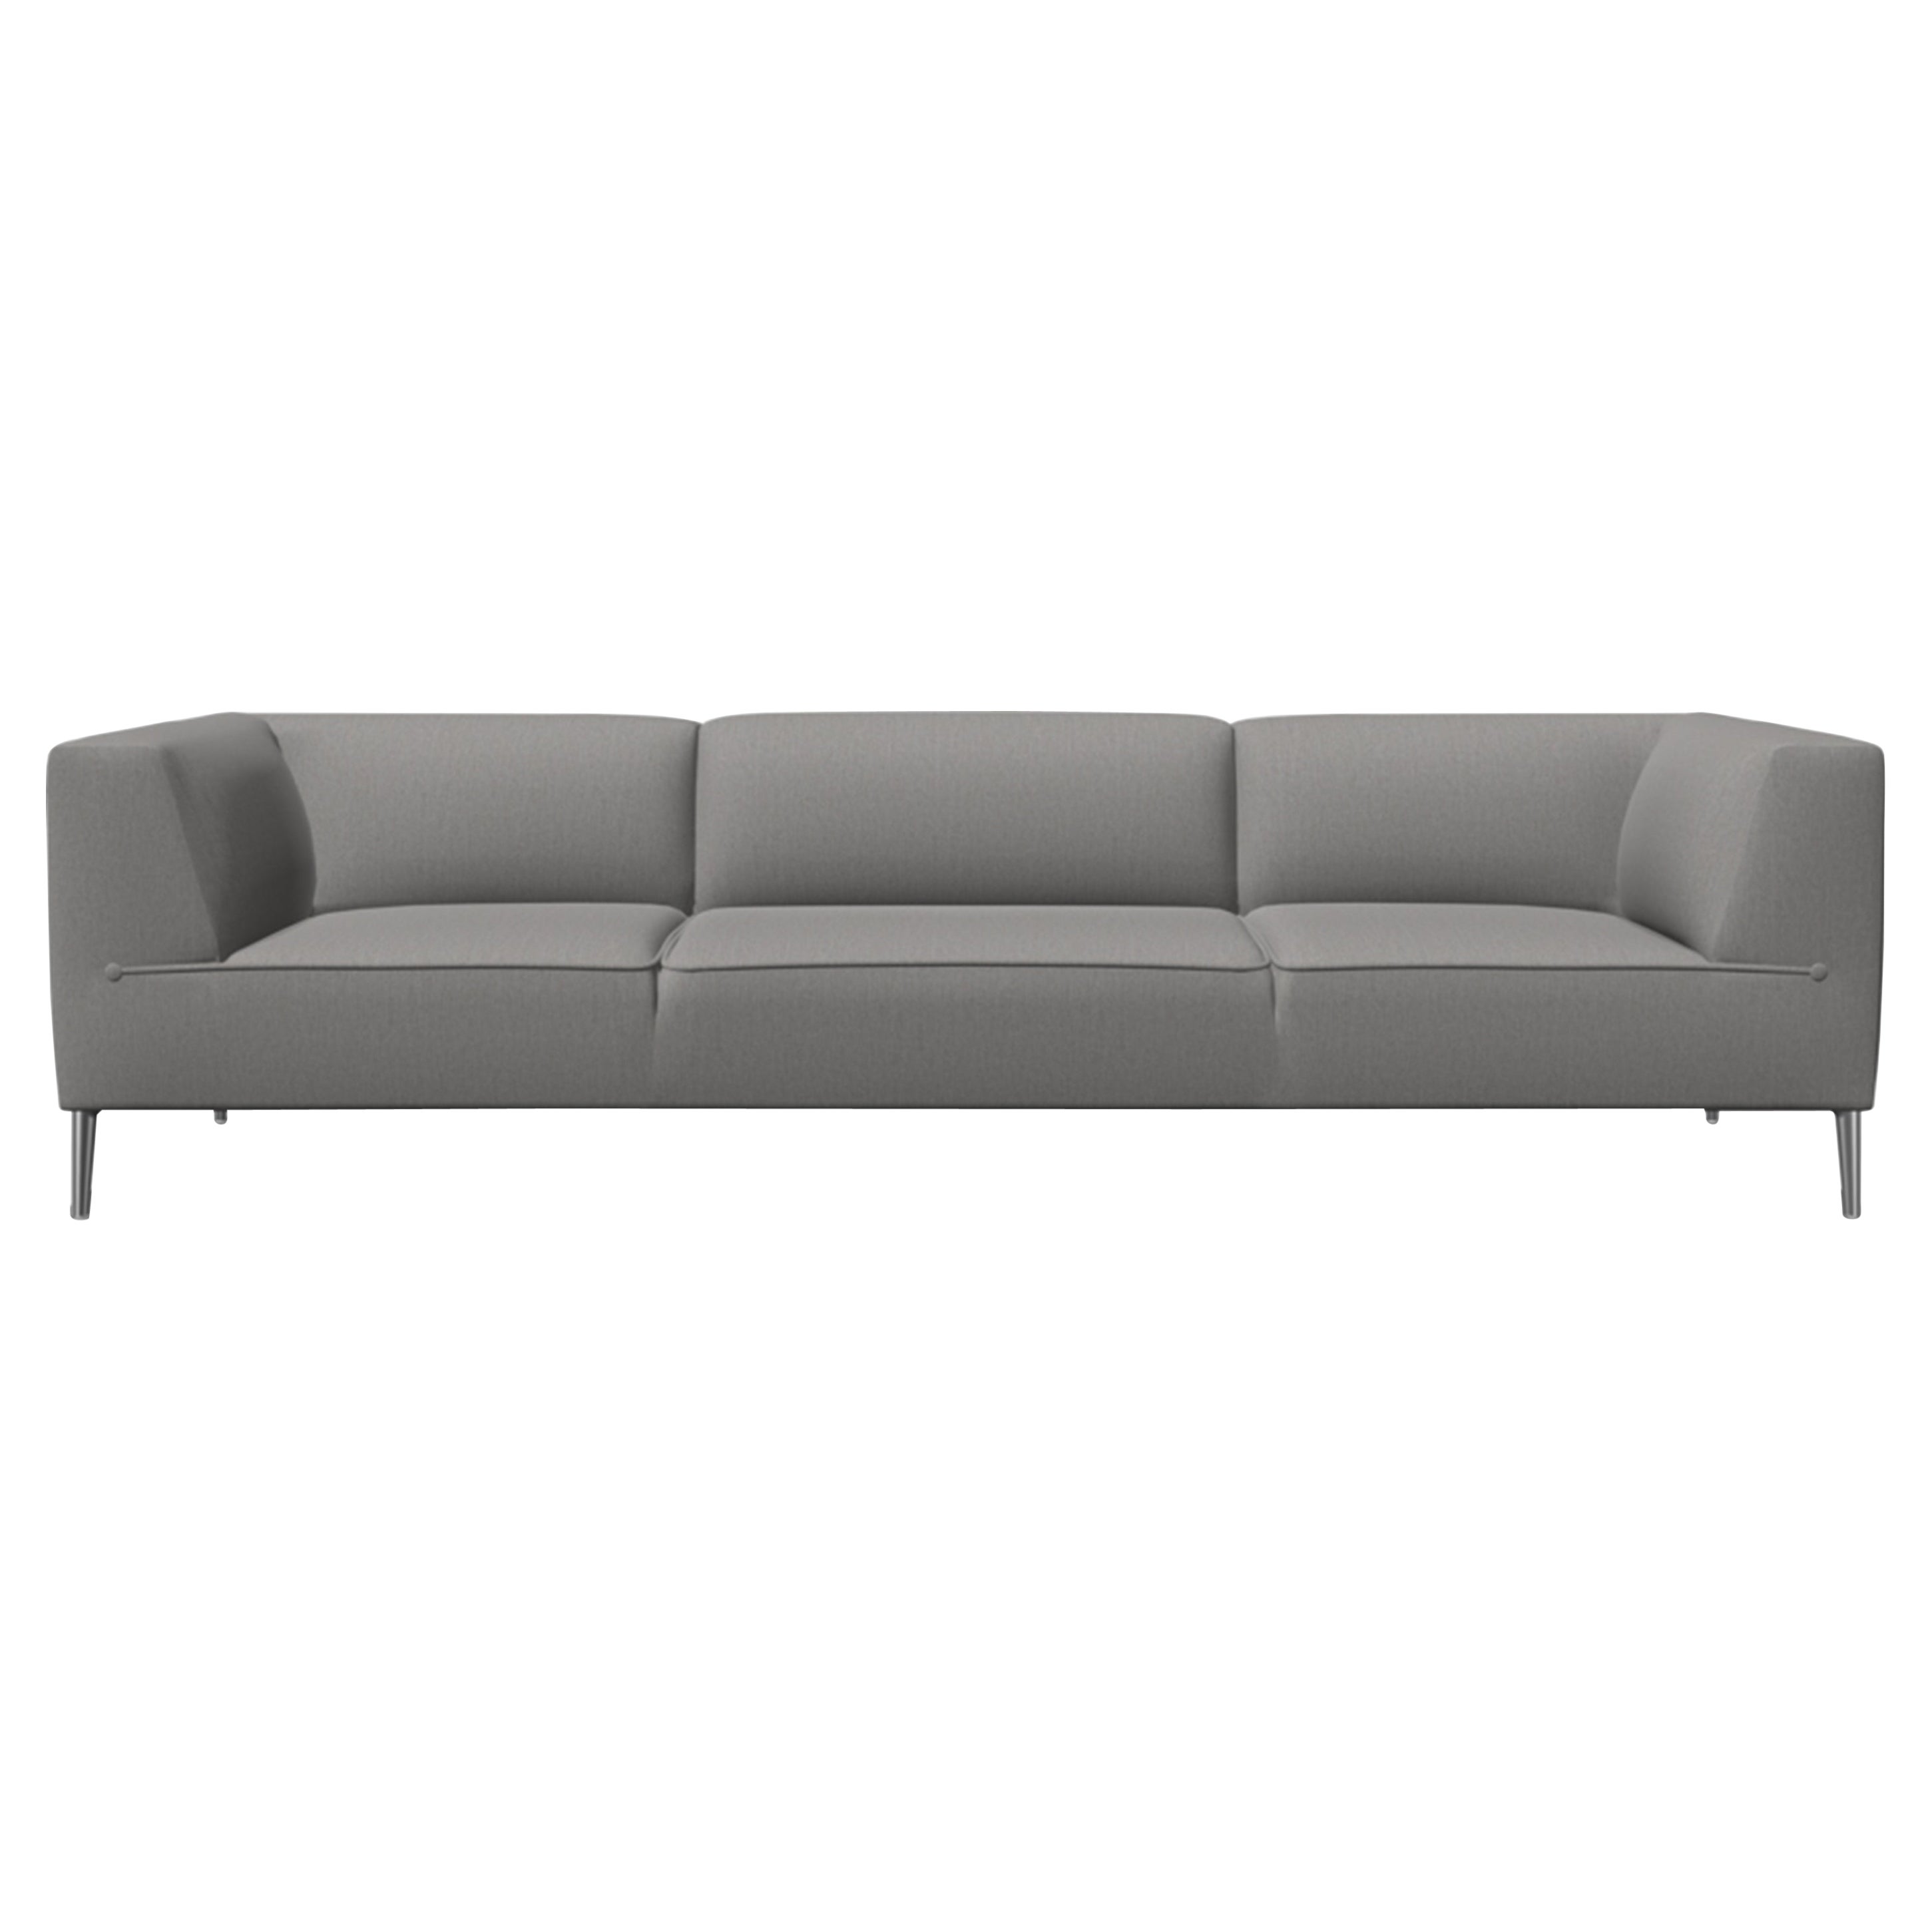 Moooi Triple Seat Sofa So Good in Justo Lyse Upholstery & Polished Aluminum Feet For Sale